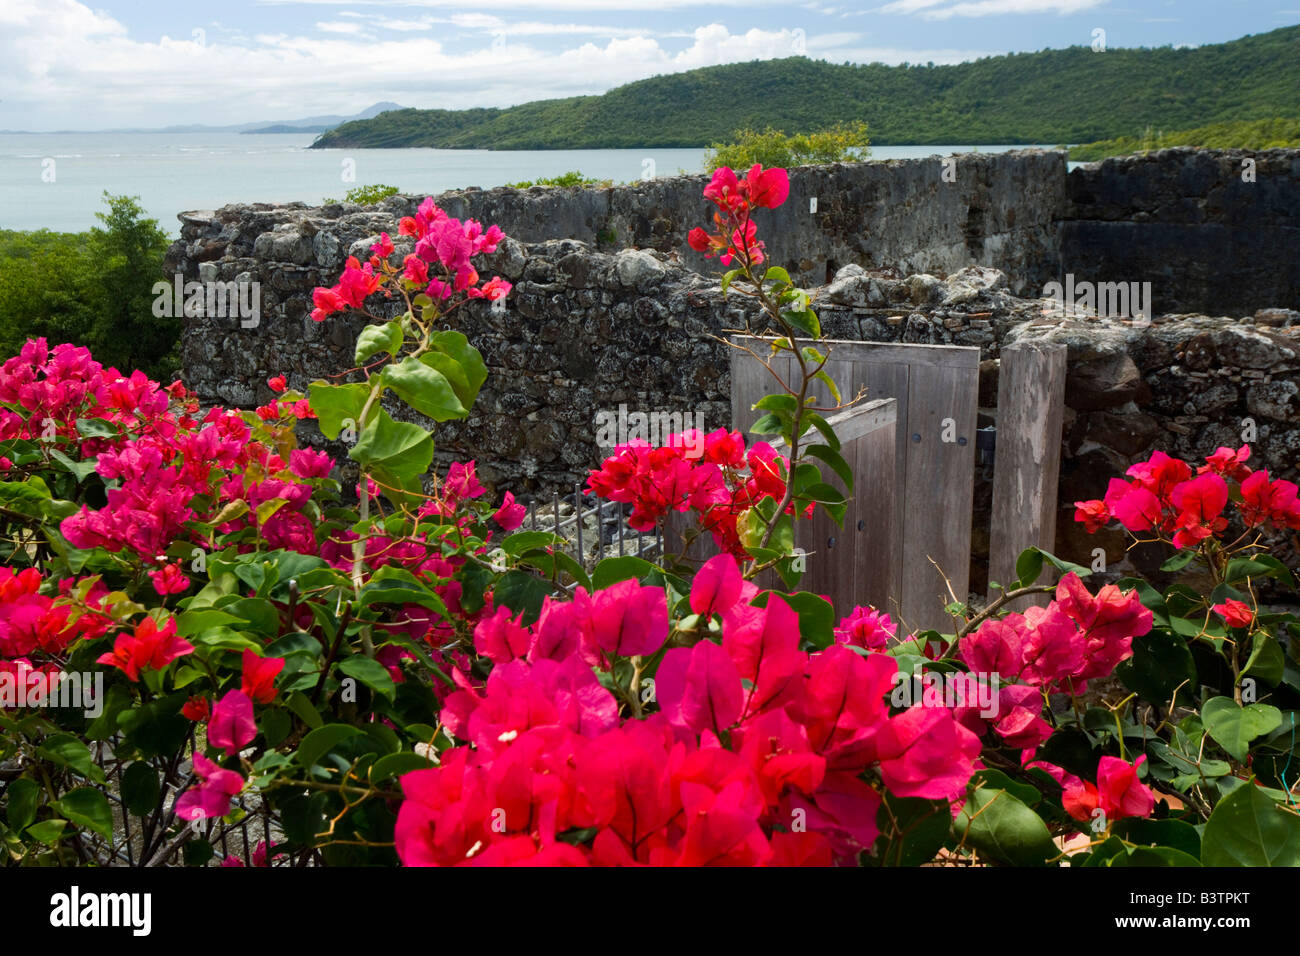 Martinique, French Antilles, West Indies, Flowering bougainvillea & ruins at site of Chateau Dubuc on the Caravelle Peninsula Stock Photo